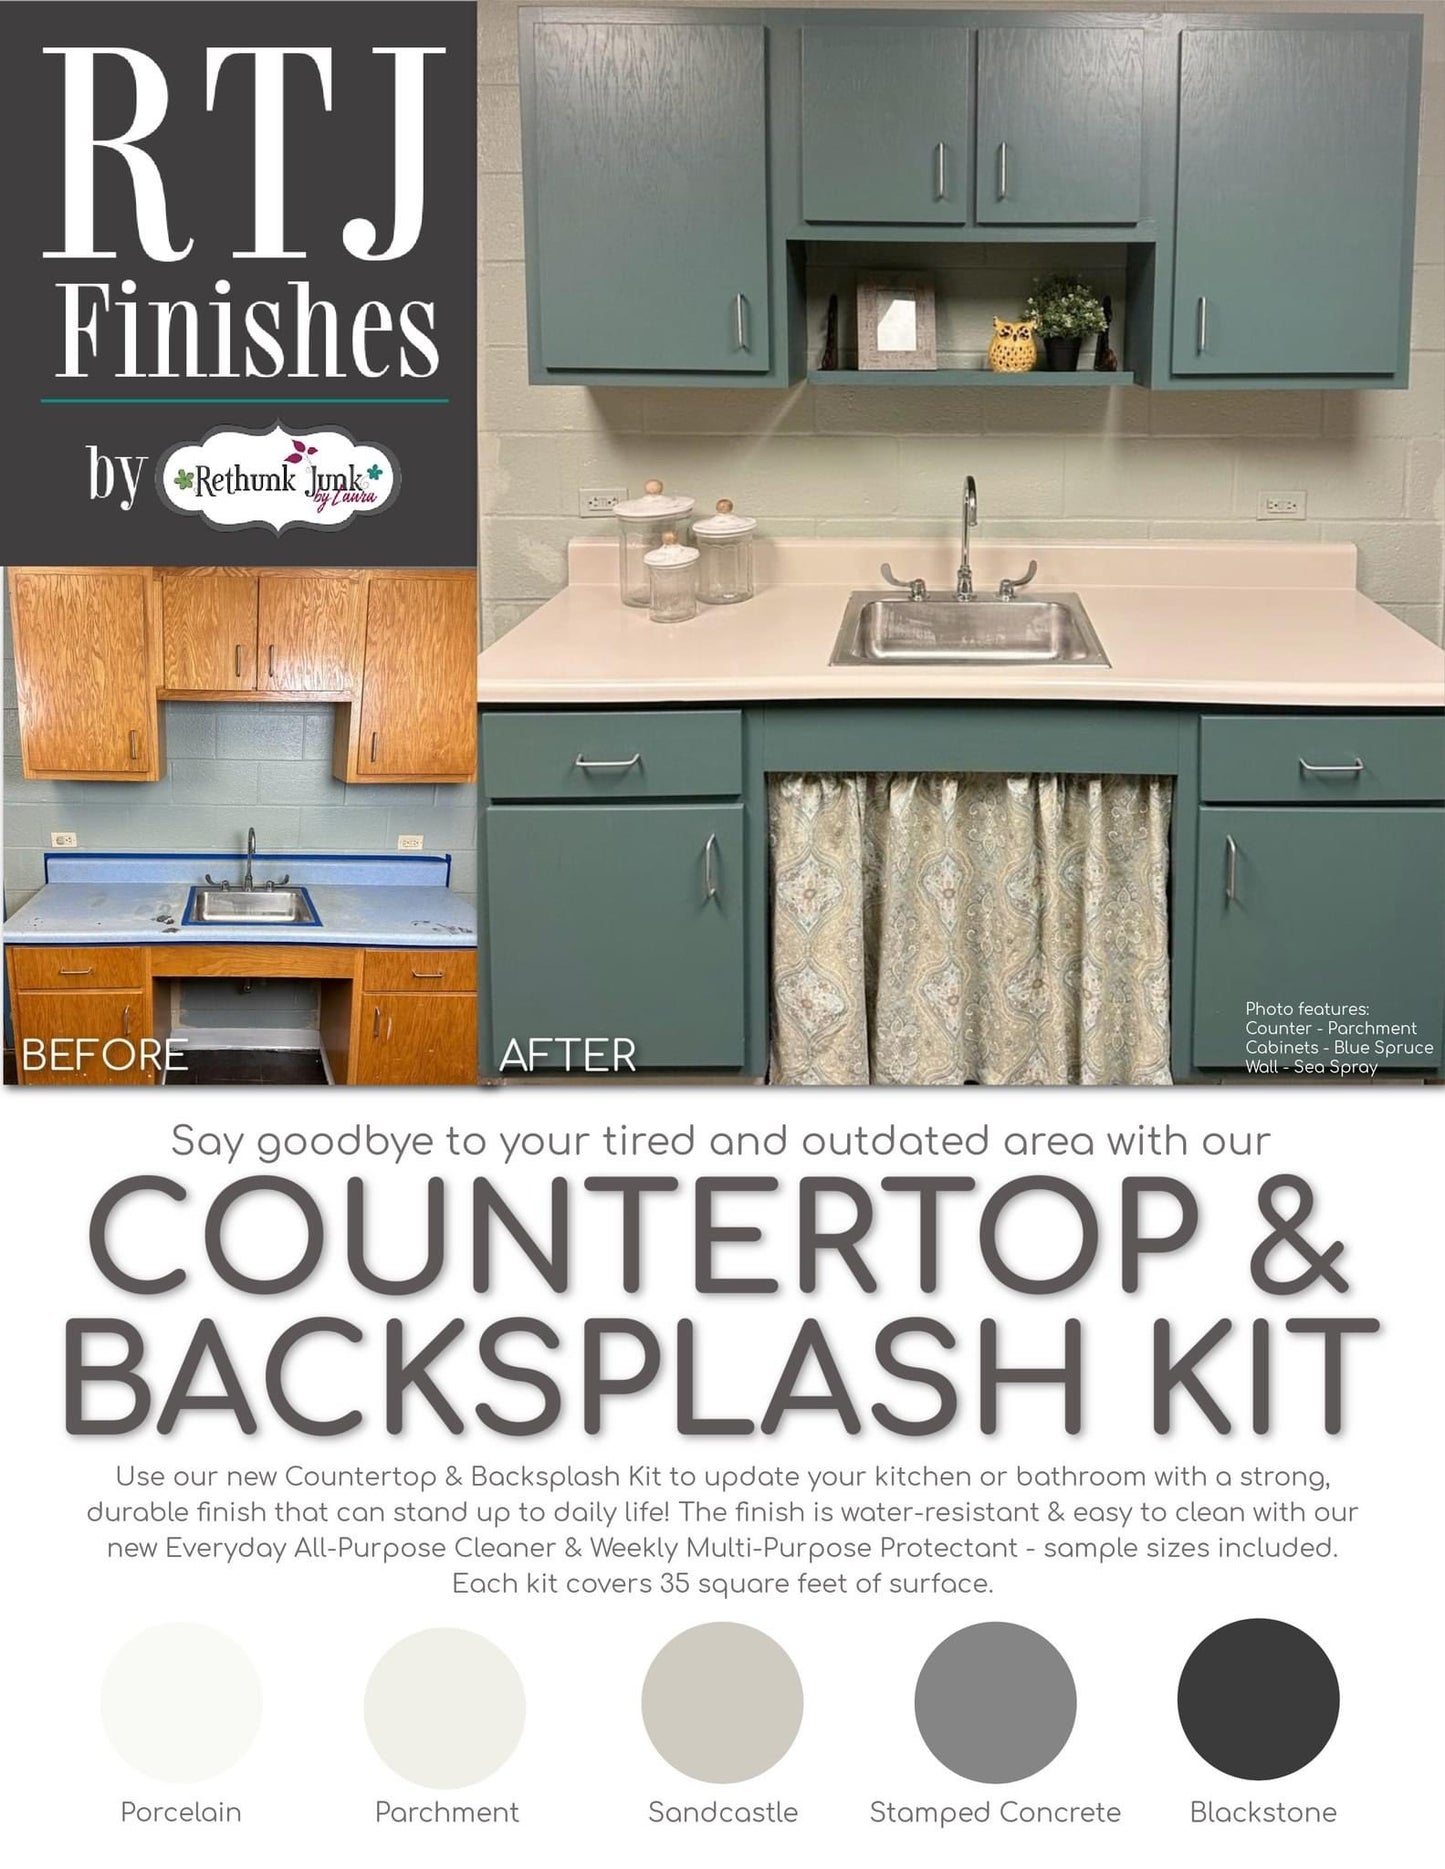 Countertop and Backsplash Kit by RTJ Finishes